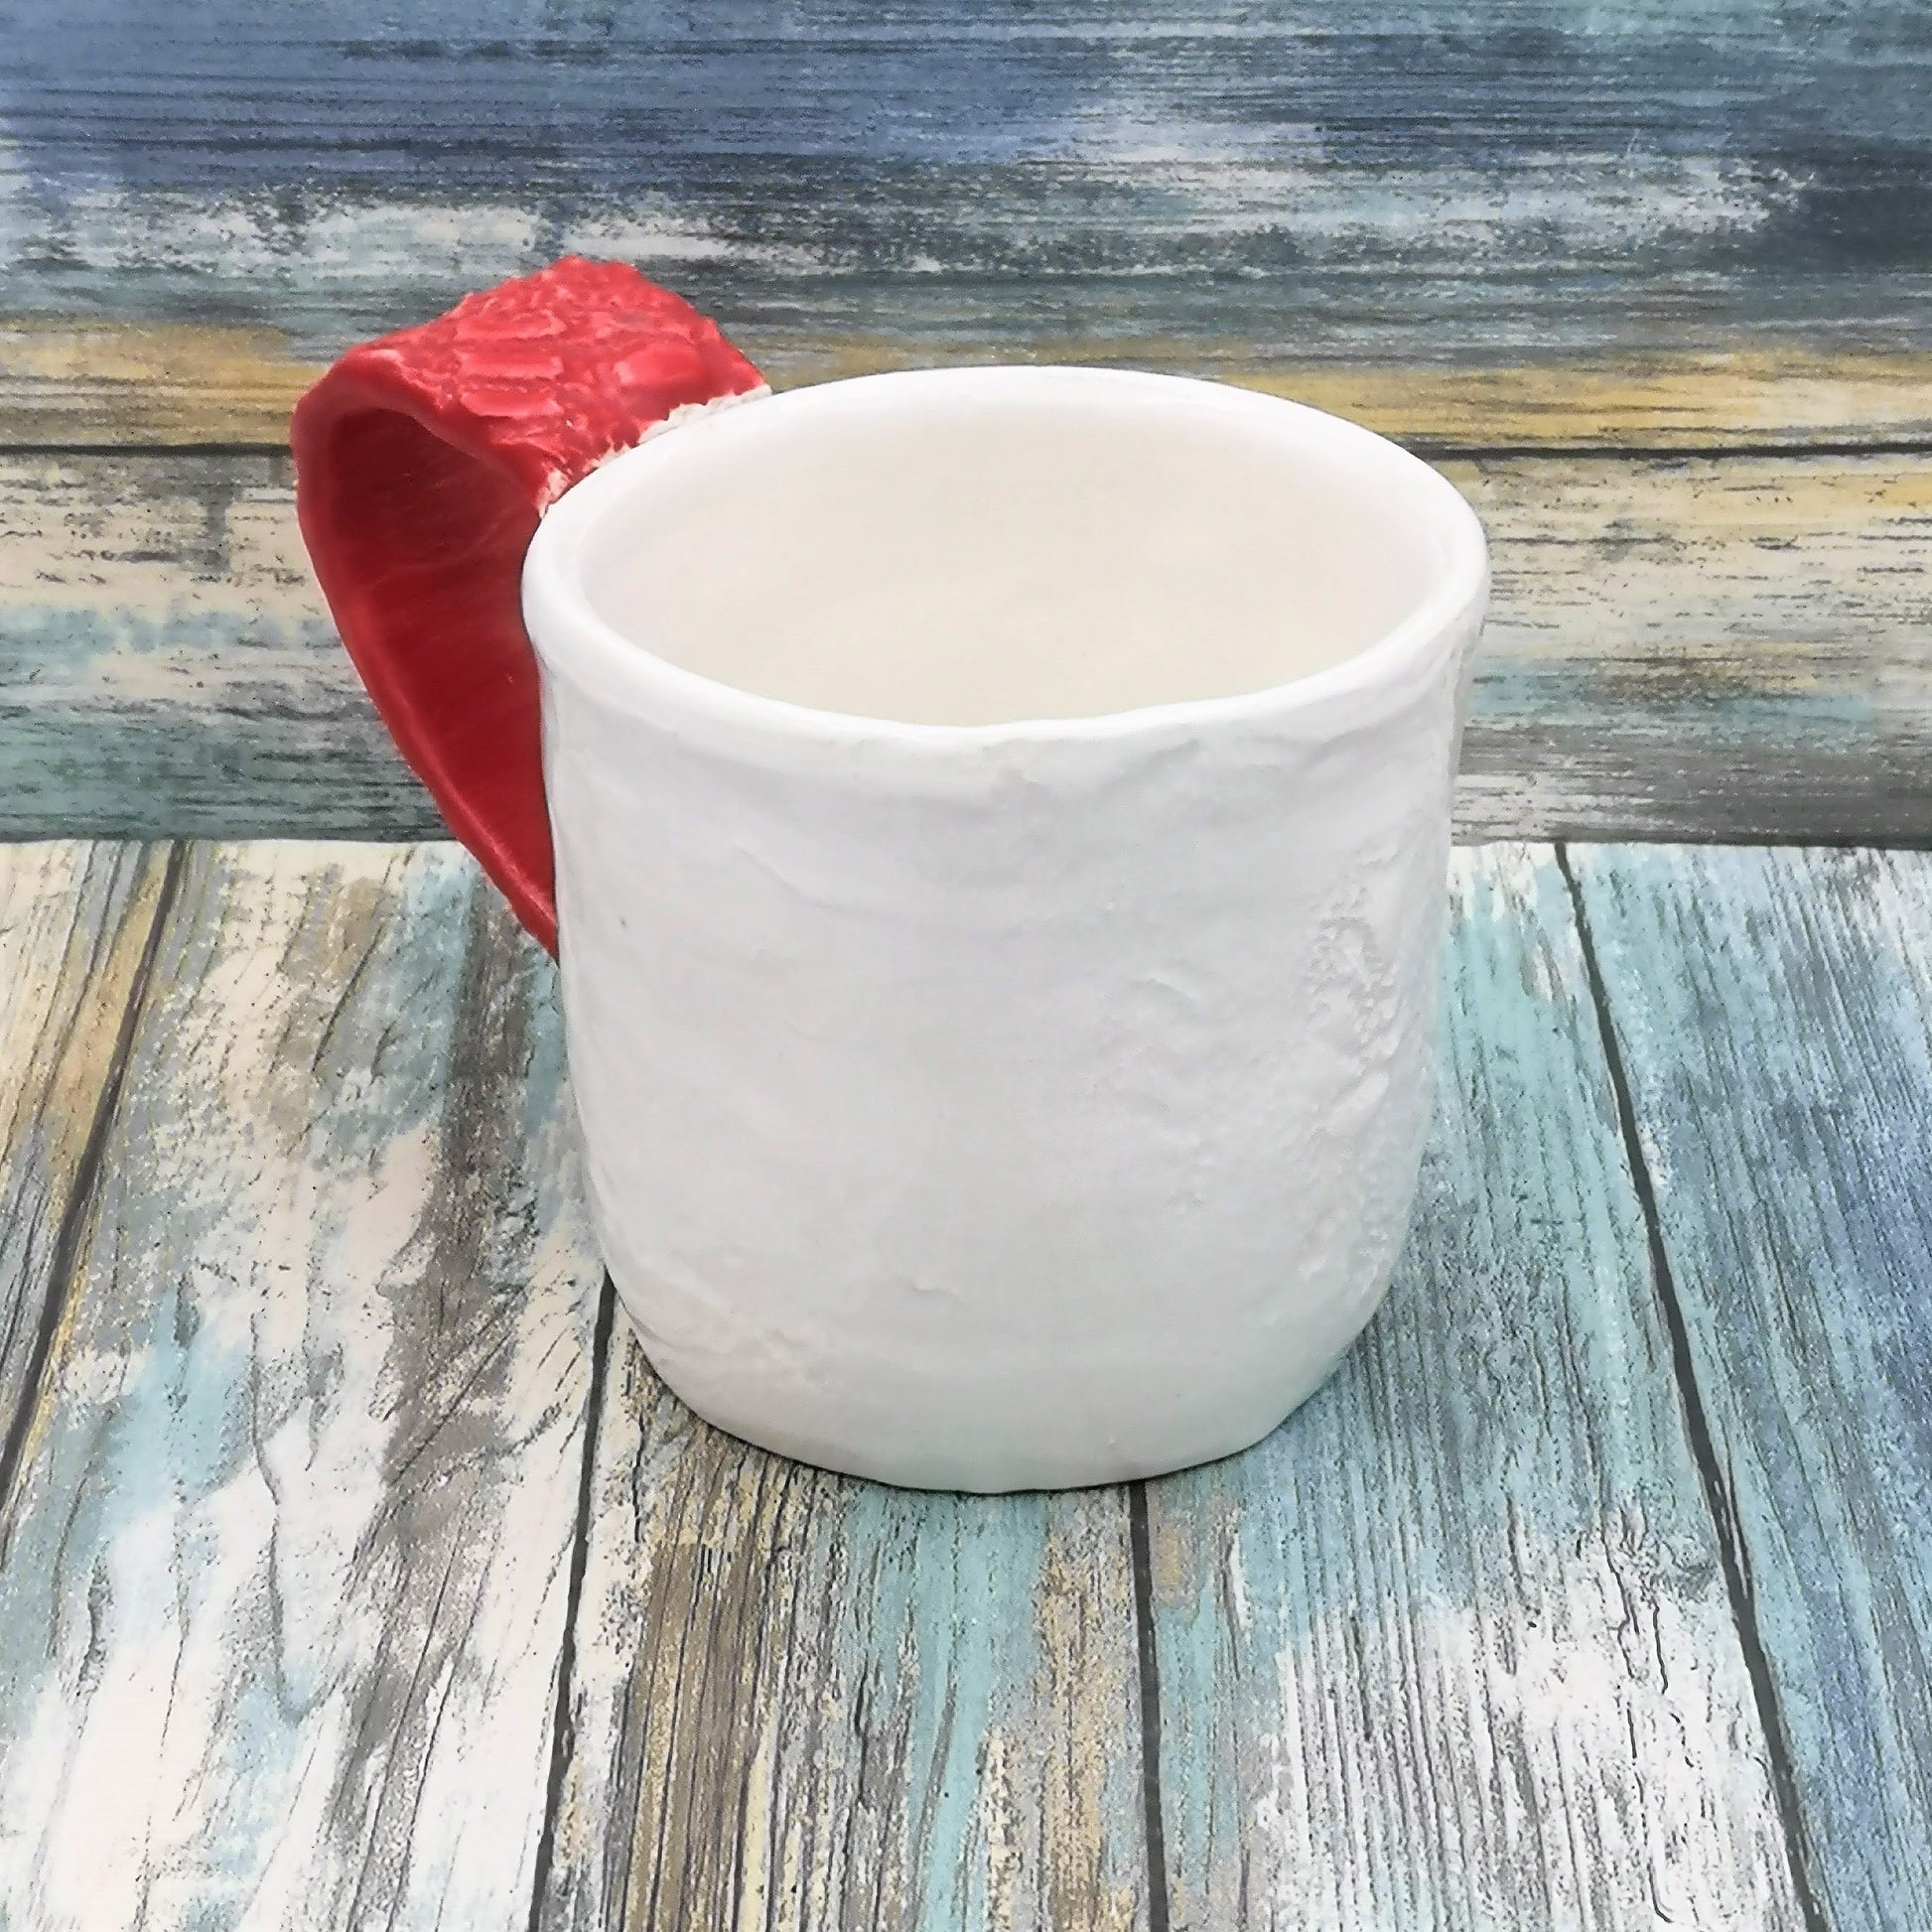 360ml/12oz Rustic Handmade Ceramic Mug Hand Painted Red And White, Large Pottery Coffee Mug, Best Gifts For Him, Coffee Lovers Gift For Her - Ceramica Ana Rafael